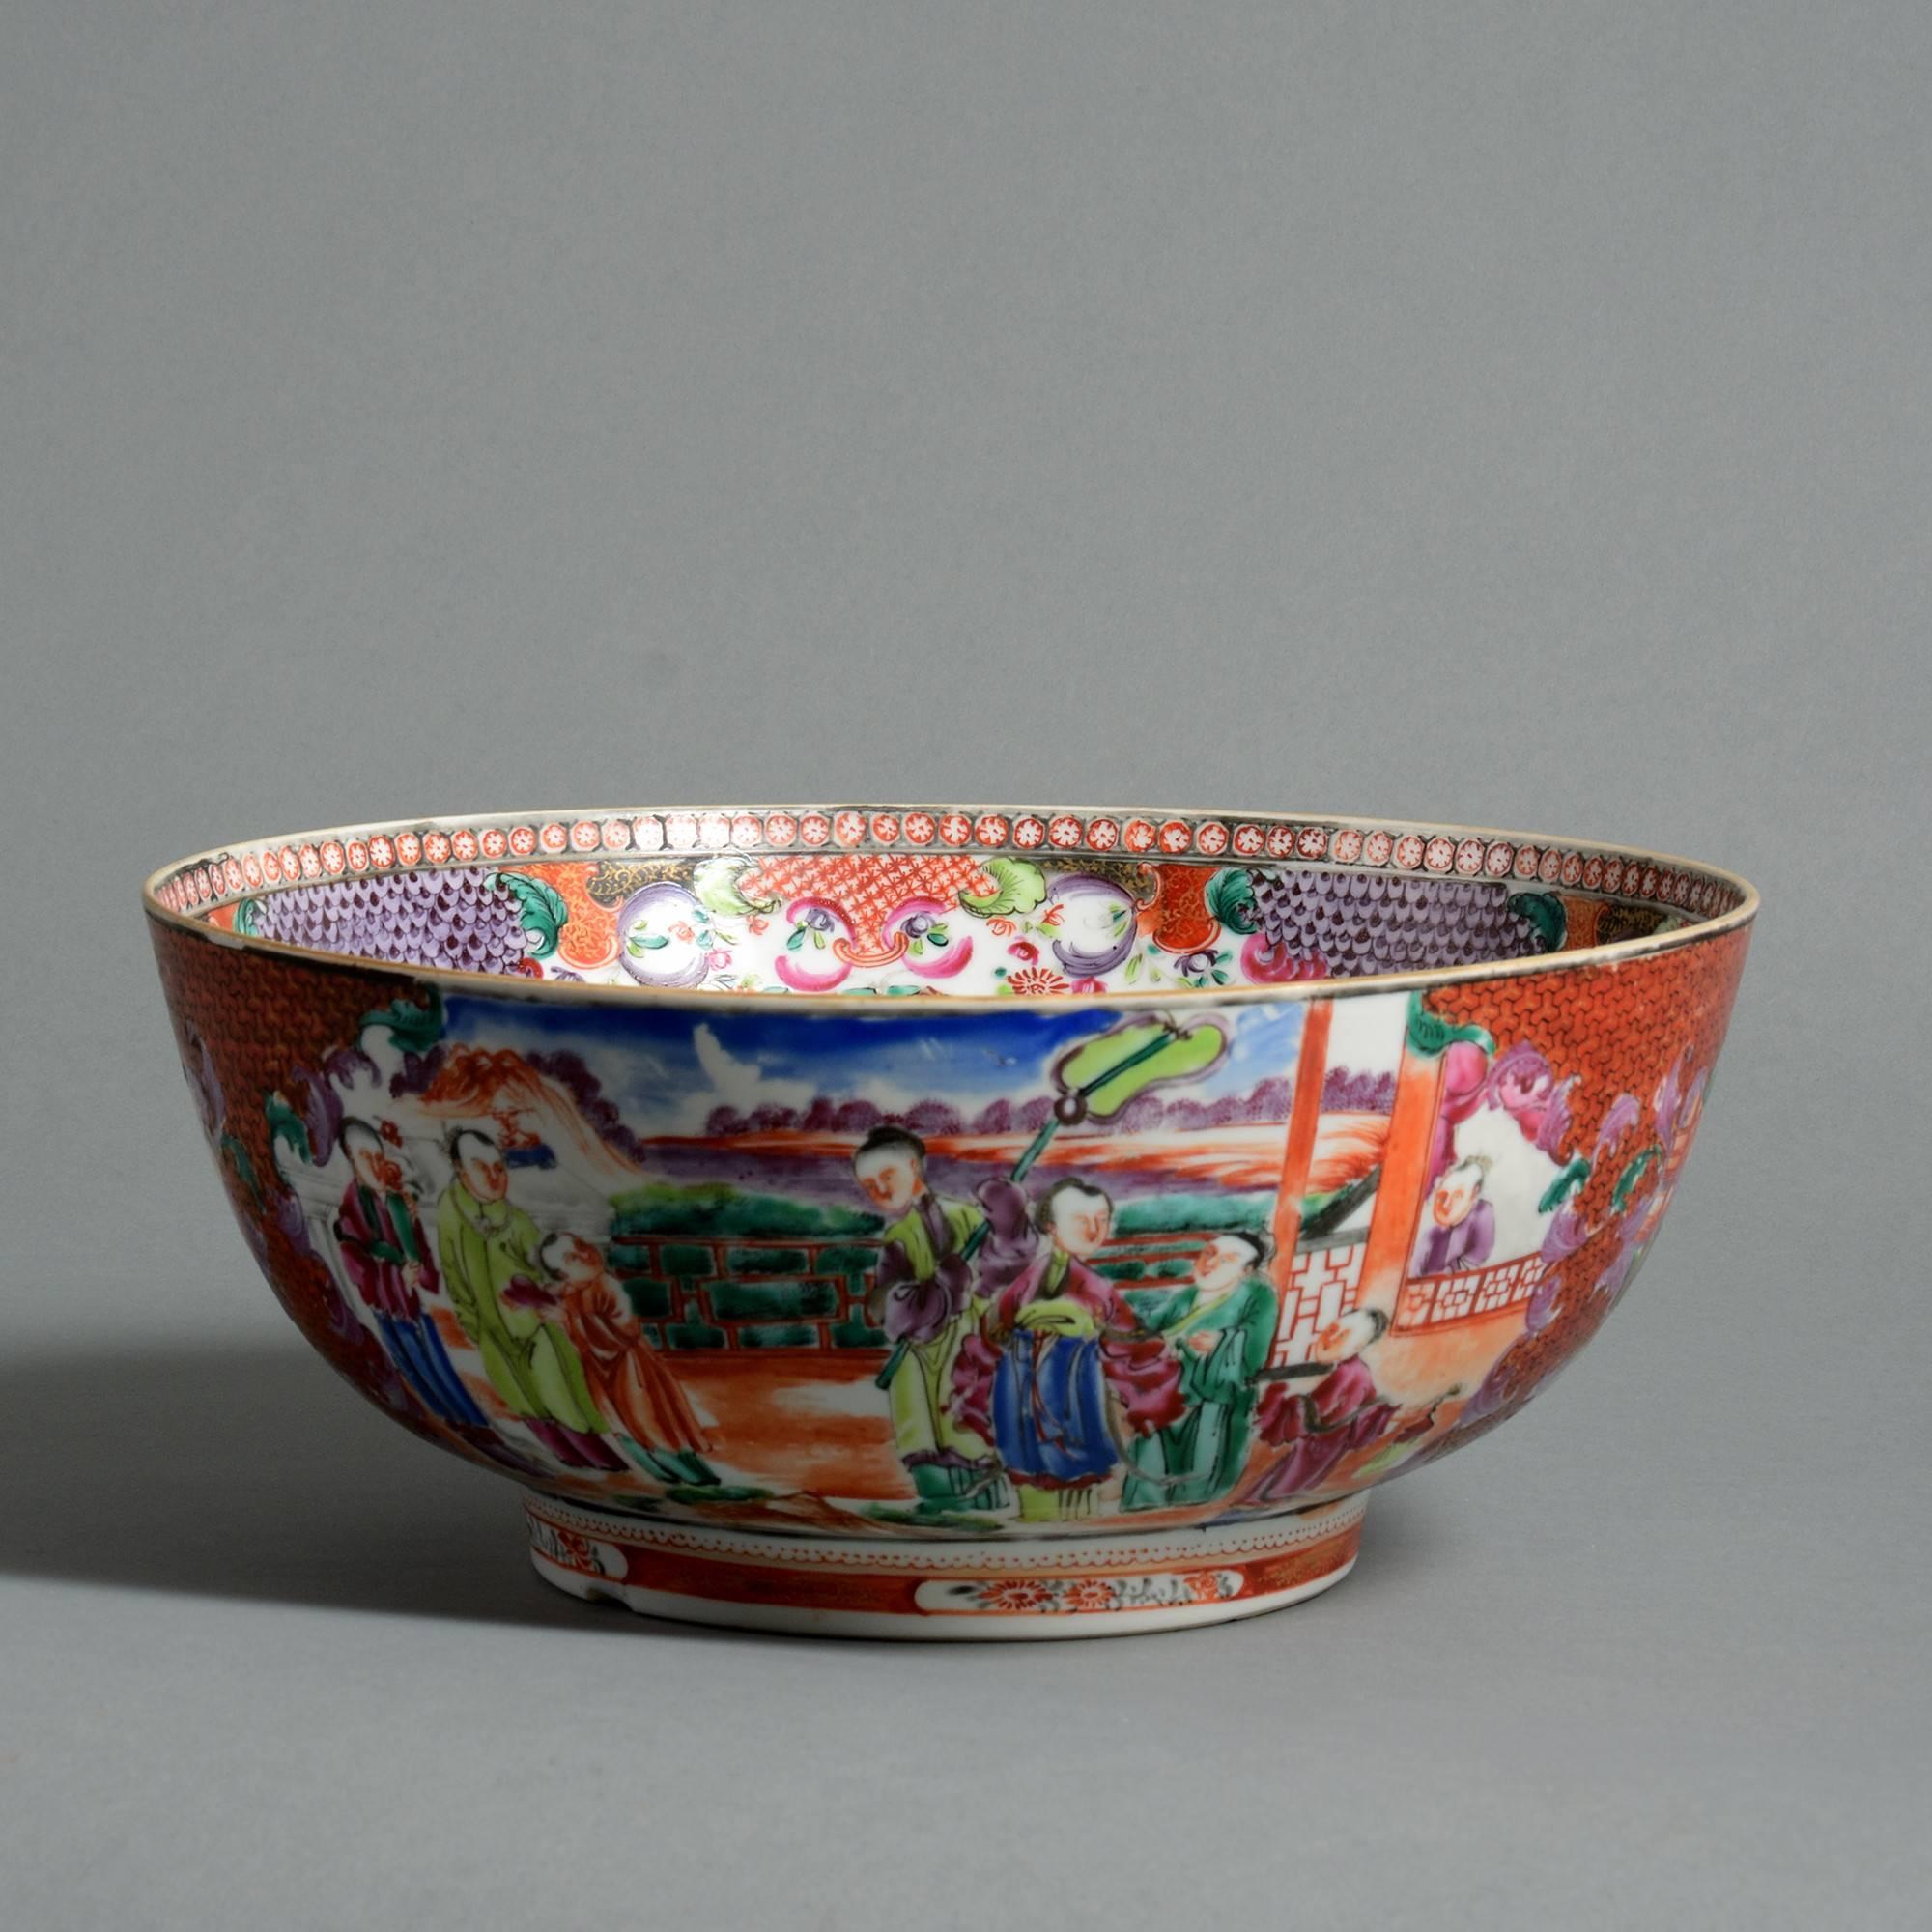 A fine late 18th century Export Market Famille rose porcelain punch bowl, with figurative scenes and floral decoration. 

Qing dynasty, Qianlong Period (1736-1795). 

Condition: Good, with firing fault to the foot.